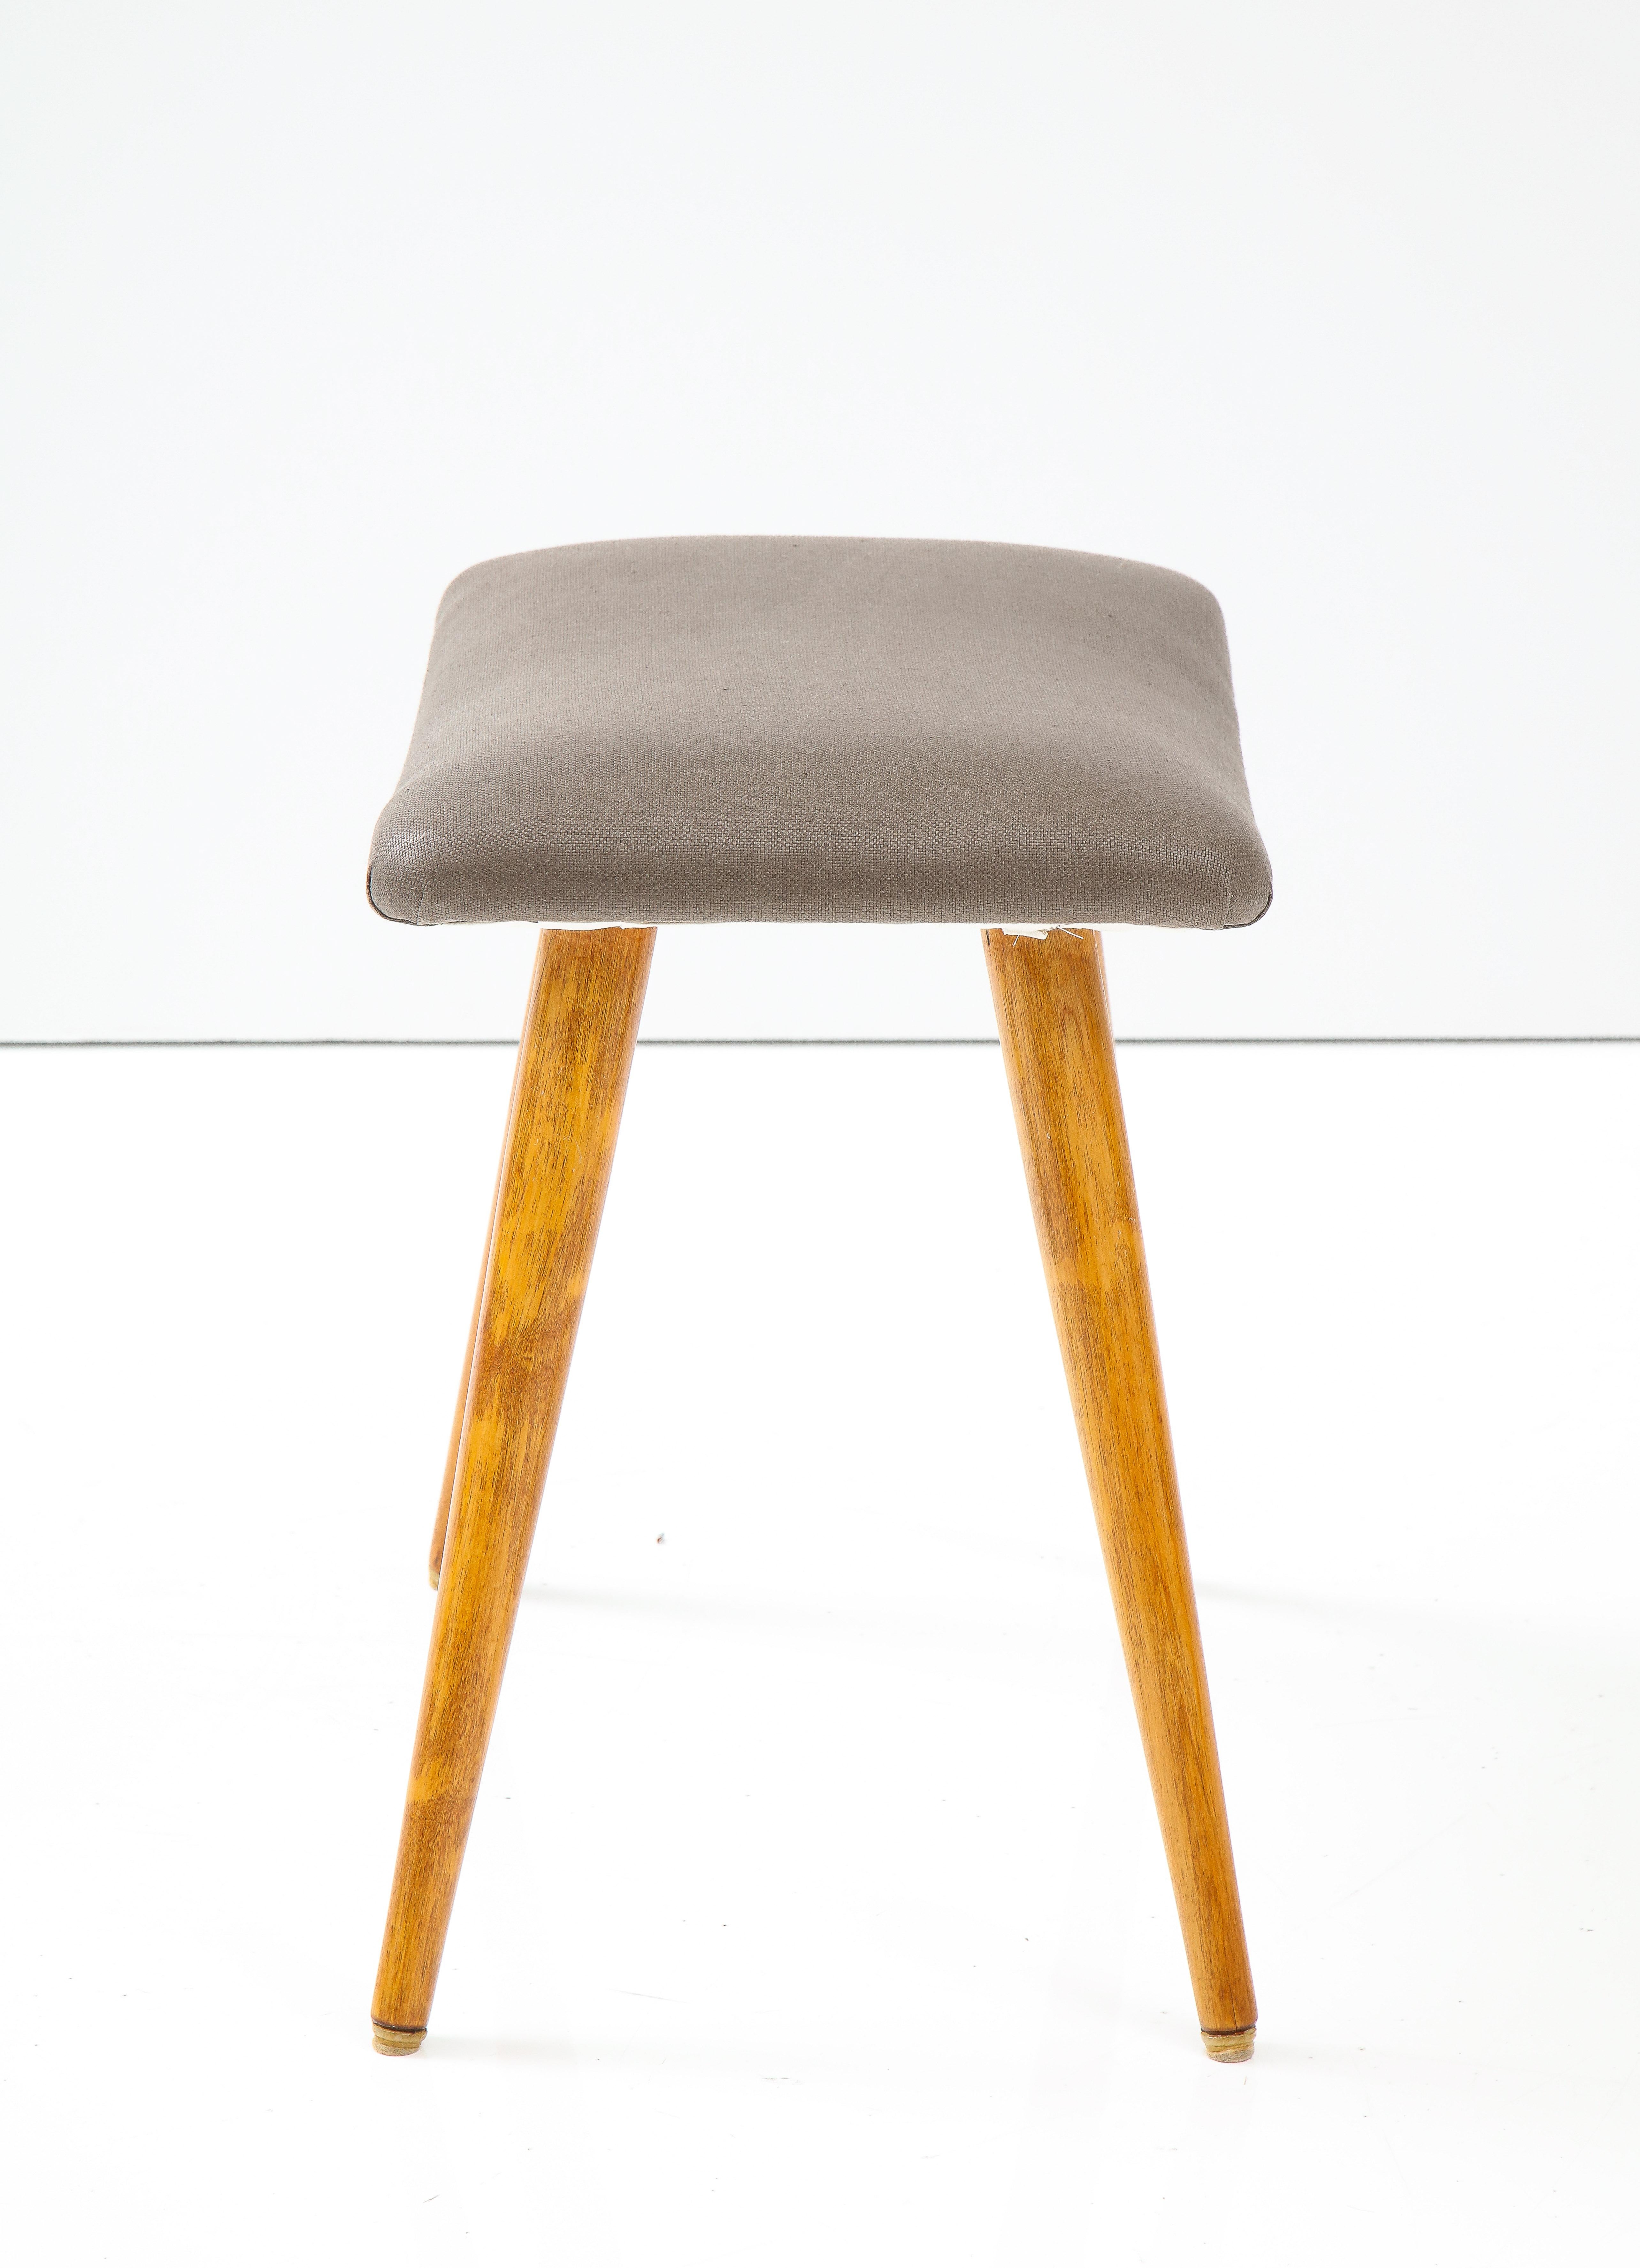 Mid-20th Century Swedish Birch and Upholstered Stool, Ca 1940s For Sale